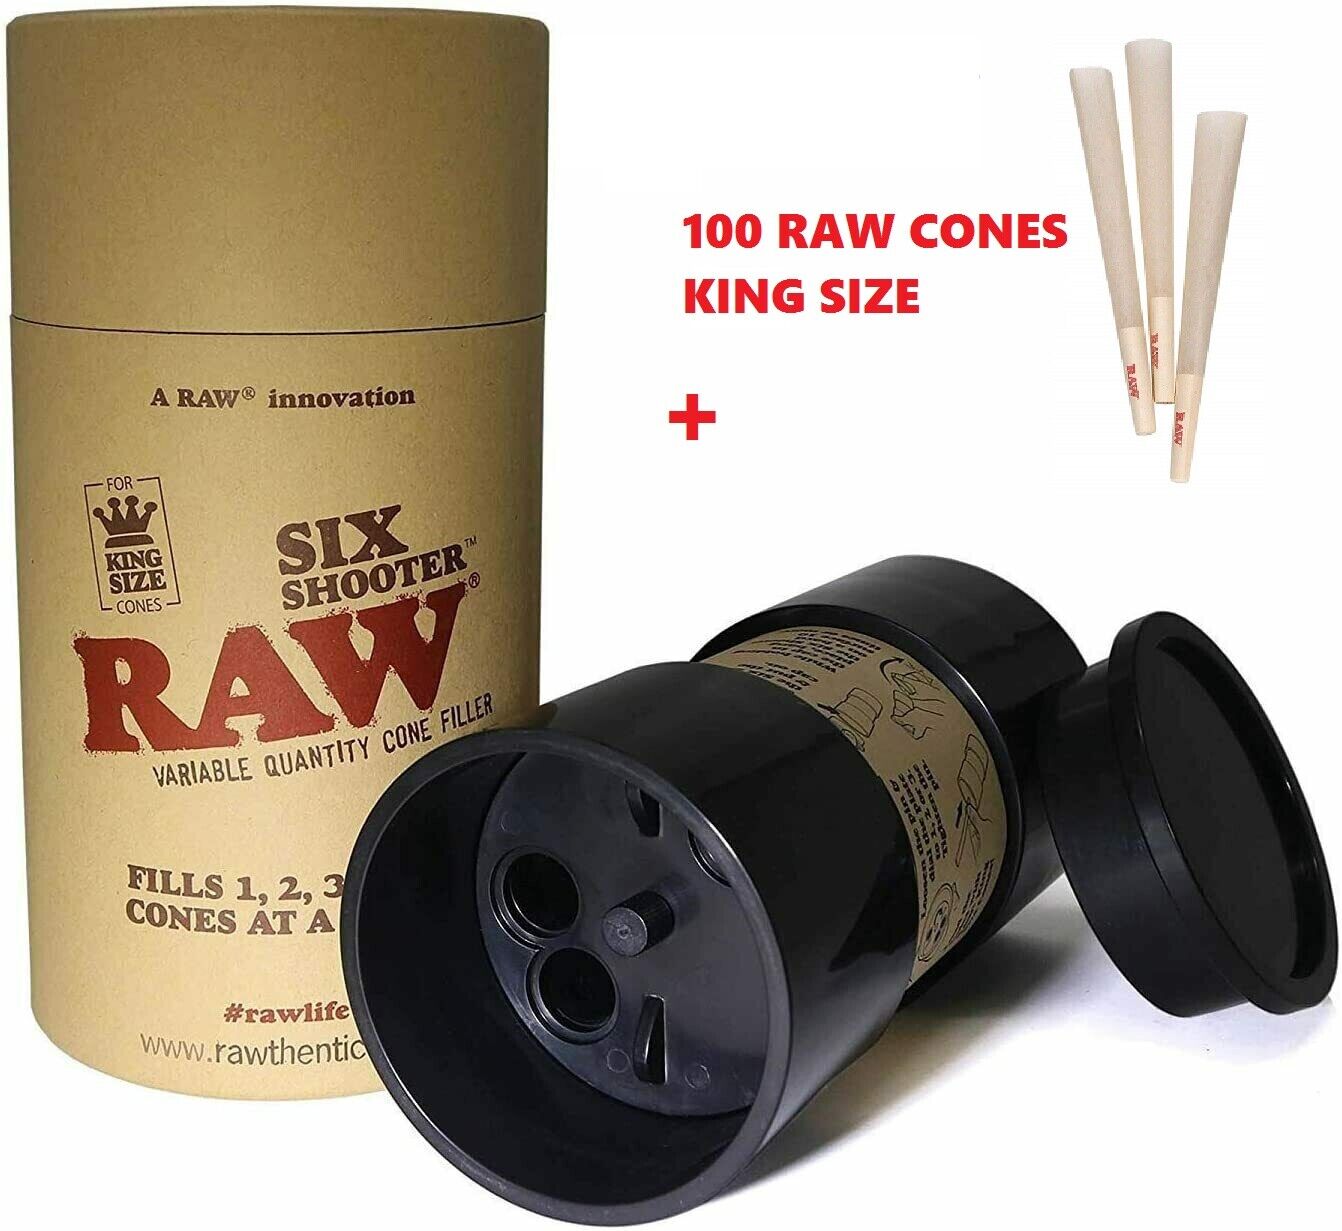 RAW Six Shooter for King Size Cones Cone Loader + 100 RAW CONES KING SIZE